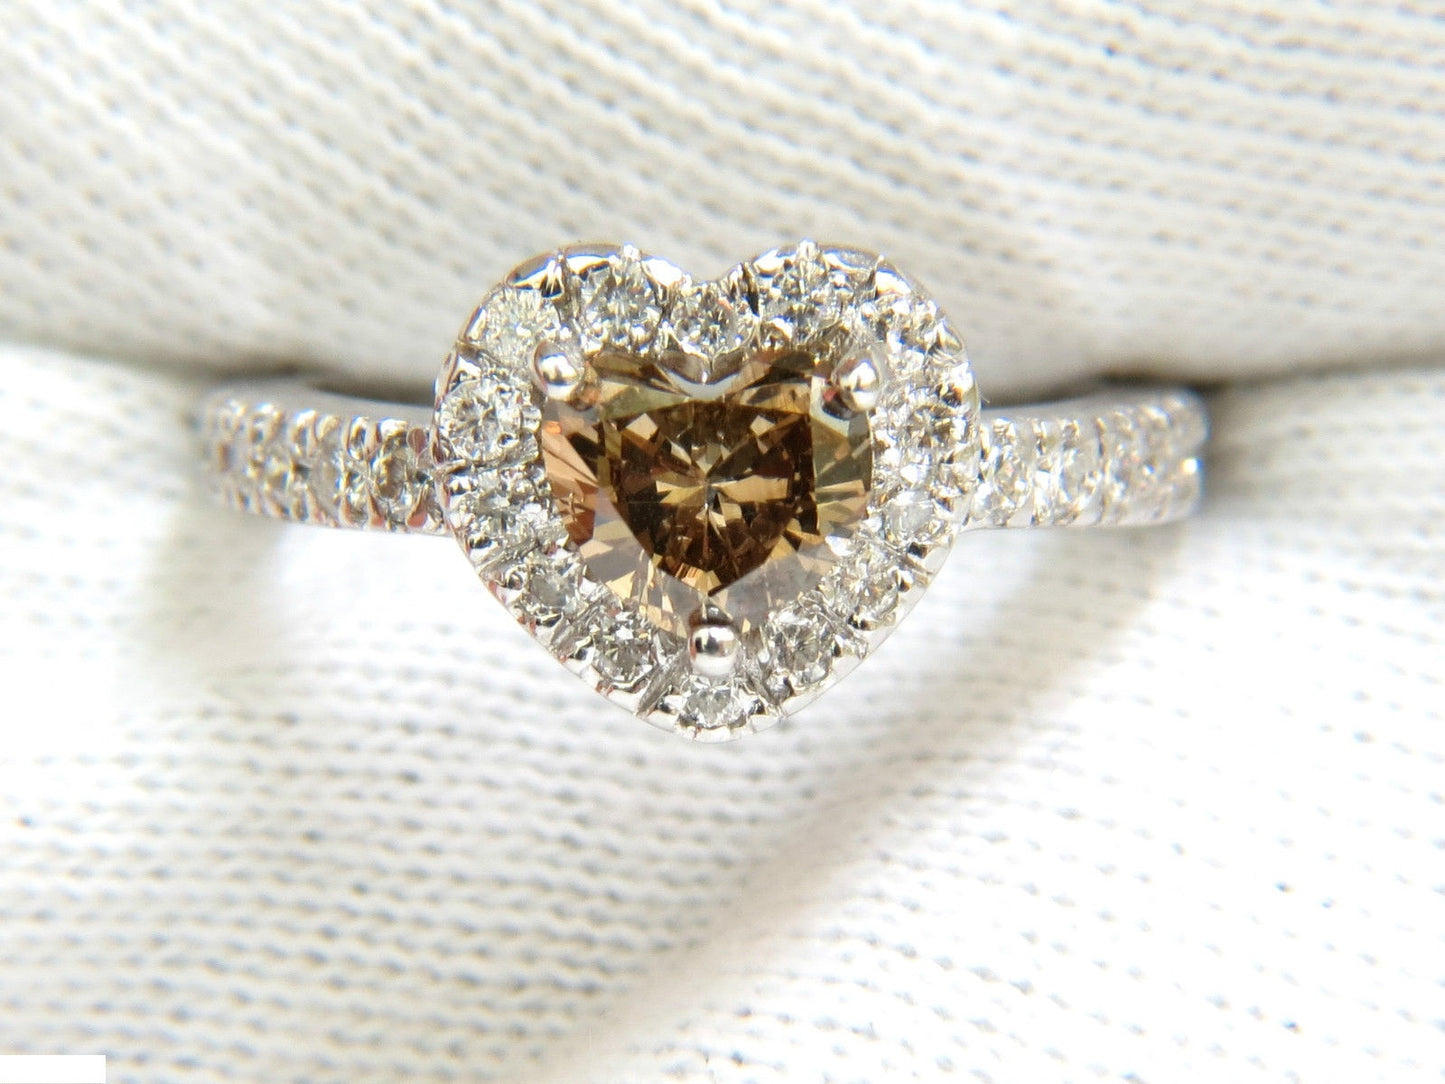 1.37CT NATURAL FANCY BRIGHT BROWN HEART CUT HALO DIAMOND RING 14KT VS